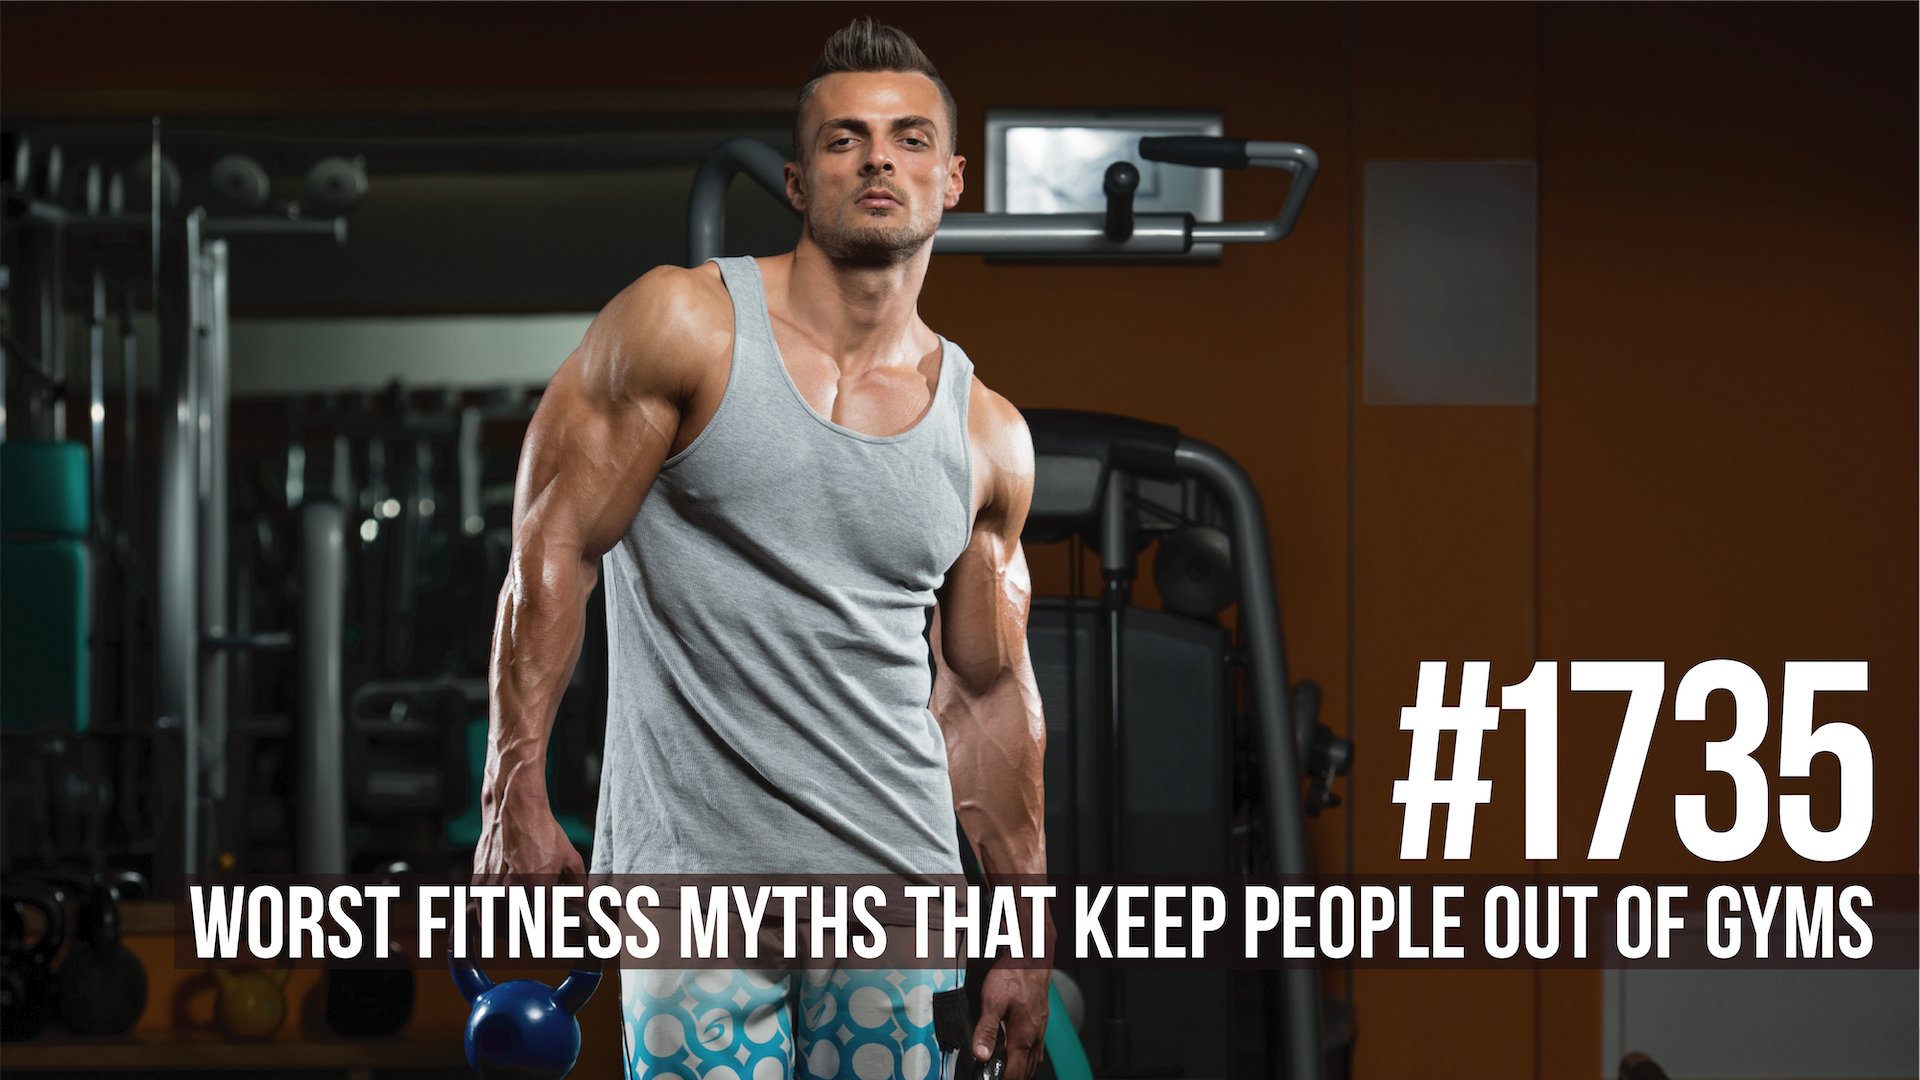 1735: Worst Fitness Myths That Keep People Out of Gyms